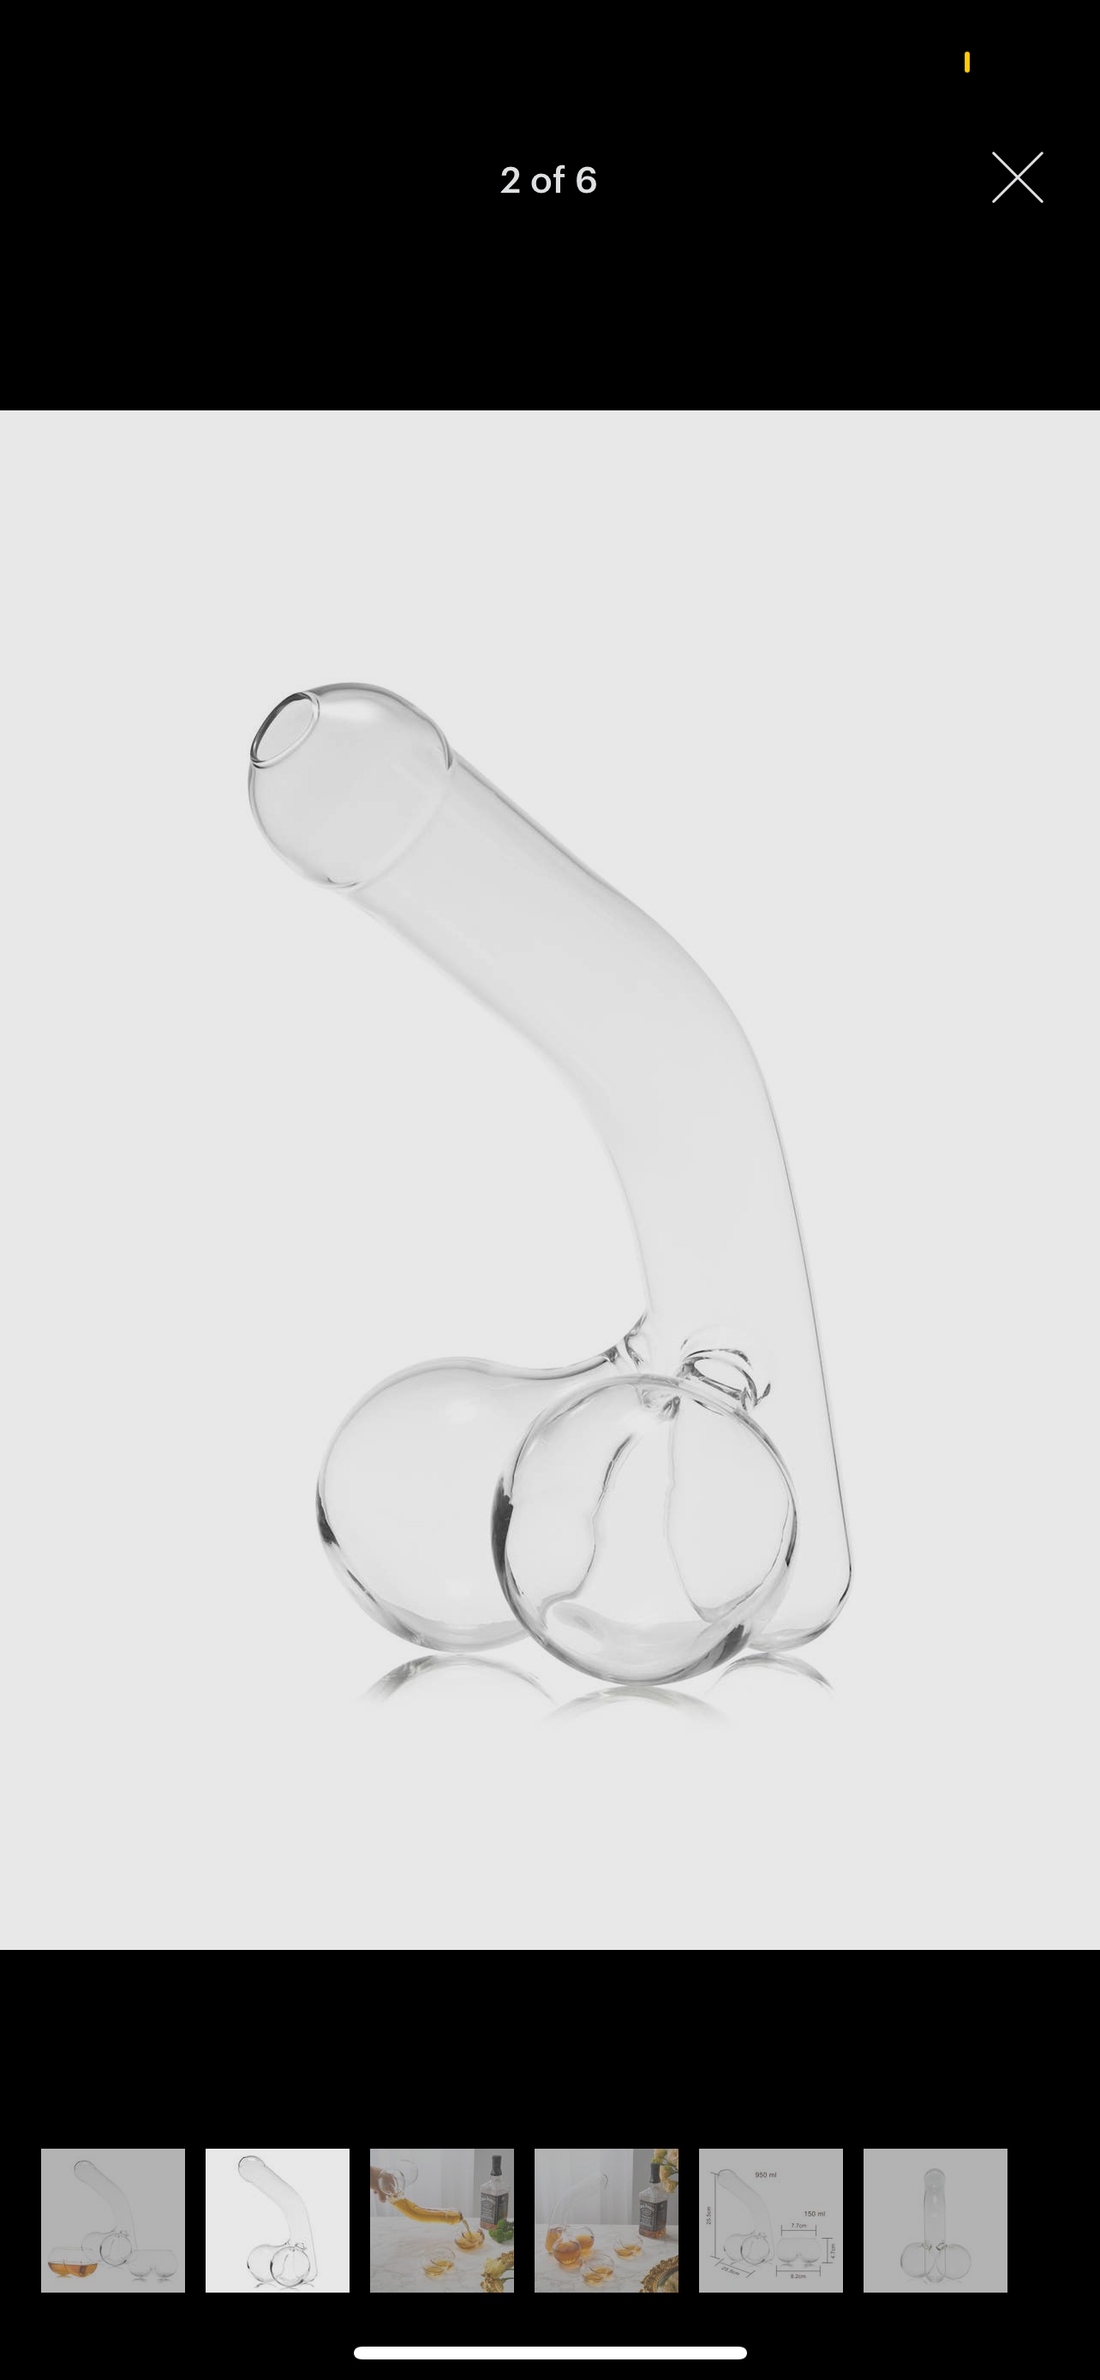 Funny Penis Whiskey Decanter - Unique & Funny Glass Container for